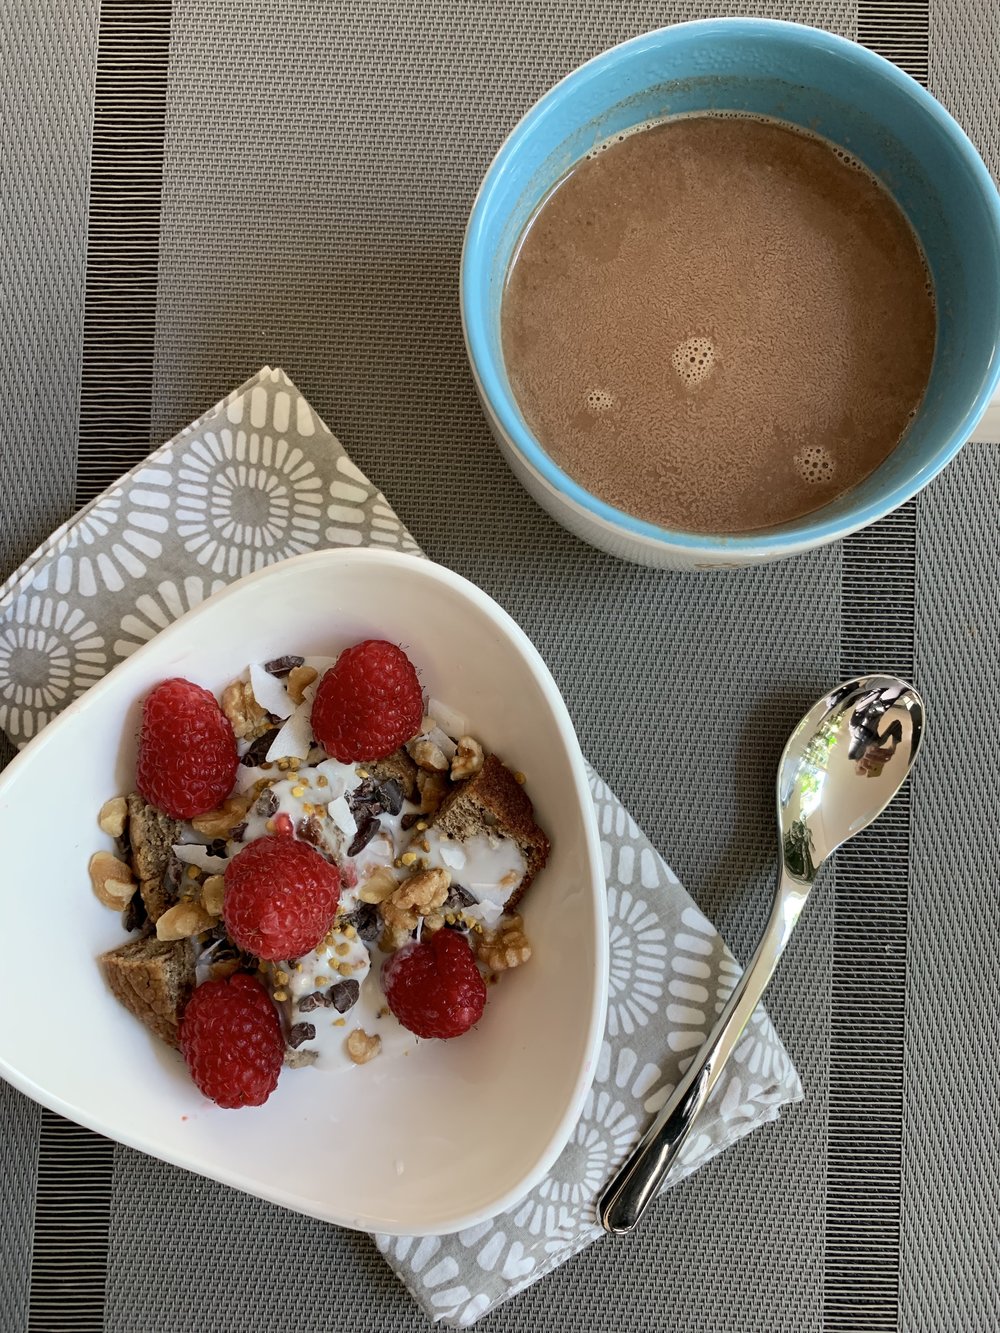 Protein hot chocolate with mushroom extract + my Loaded Yogurt Bowl = best breakfast EVER!